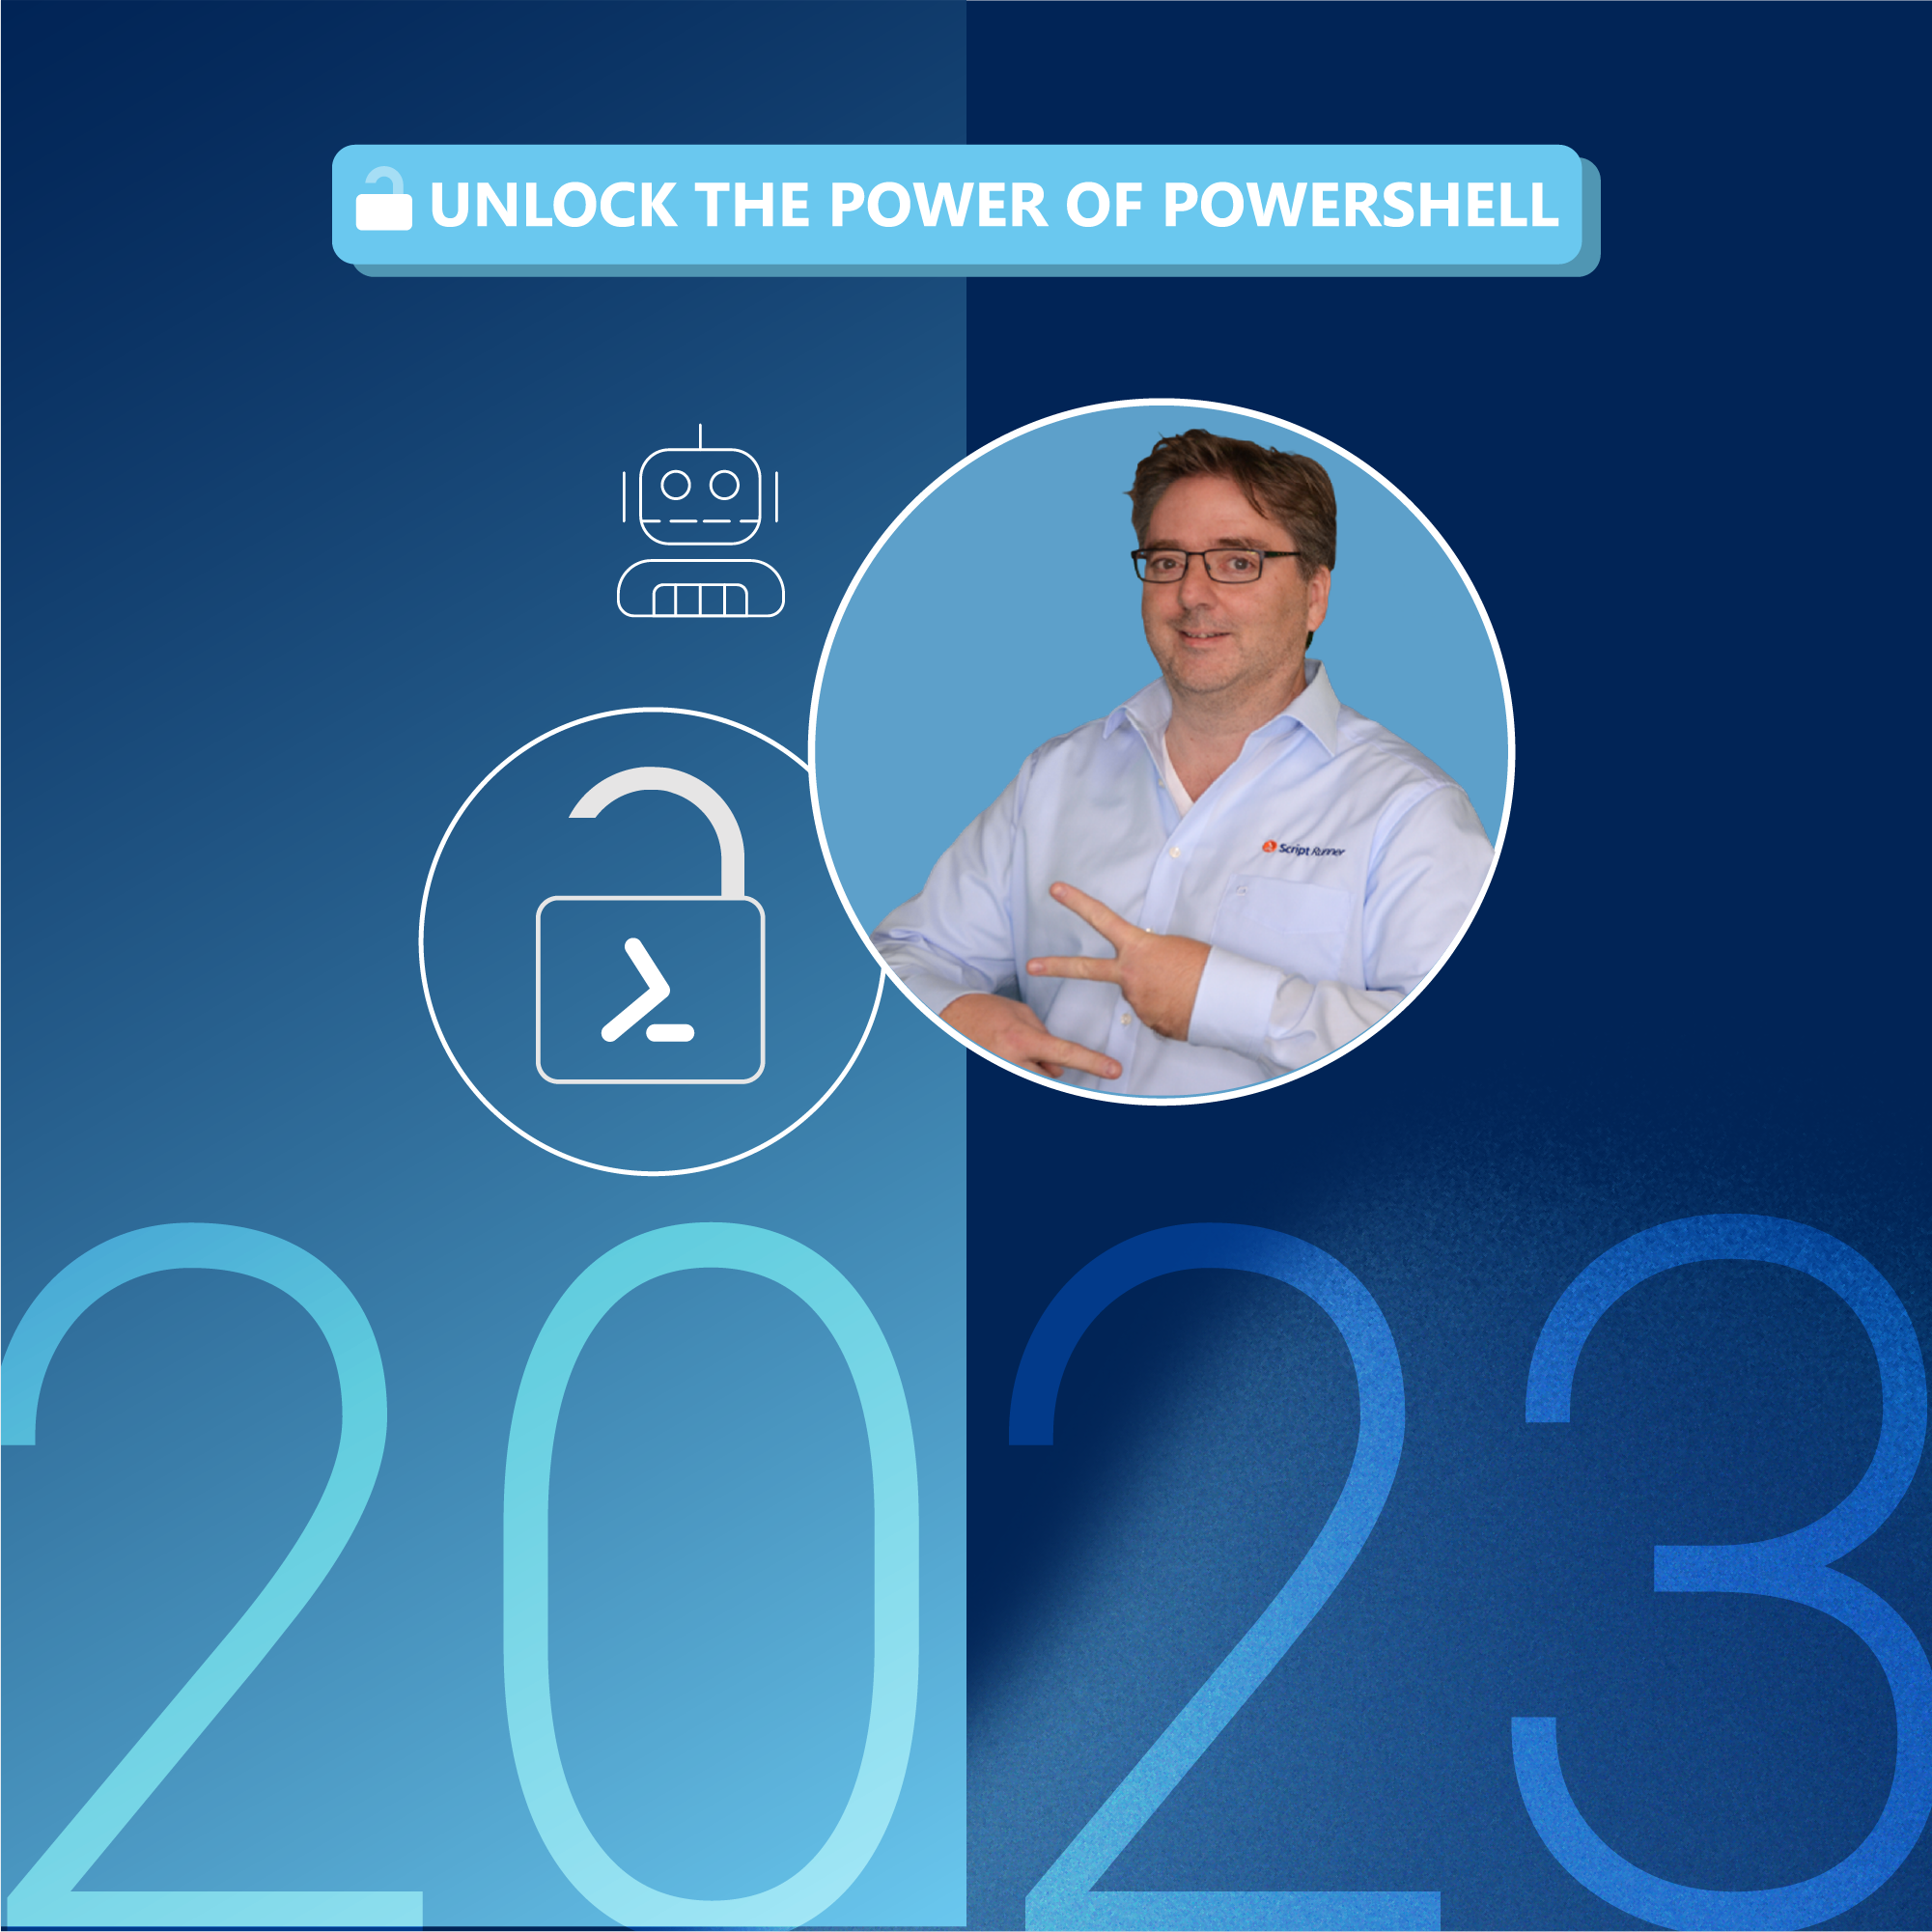 Webinar: 2023 - It's time to unlock the power of PowerShell